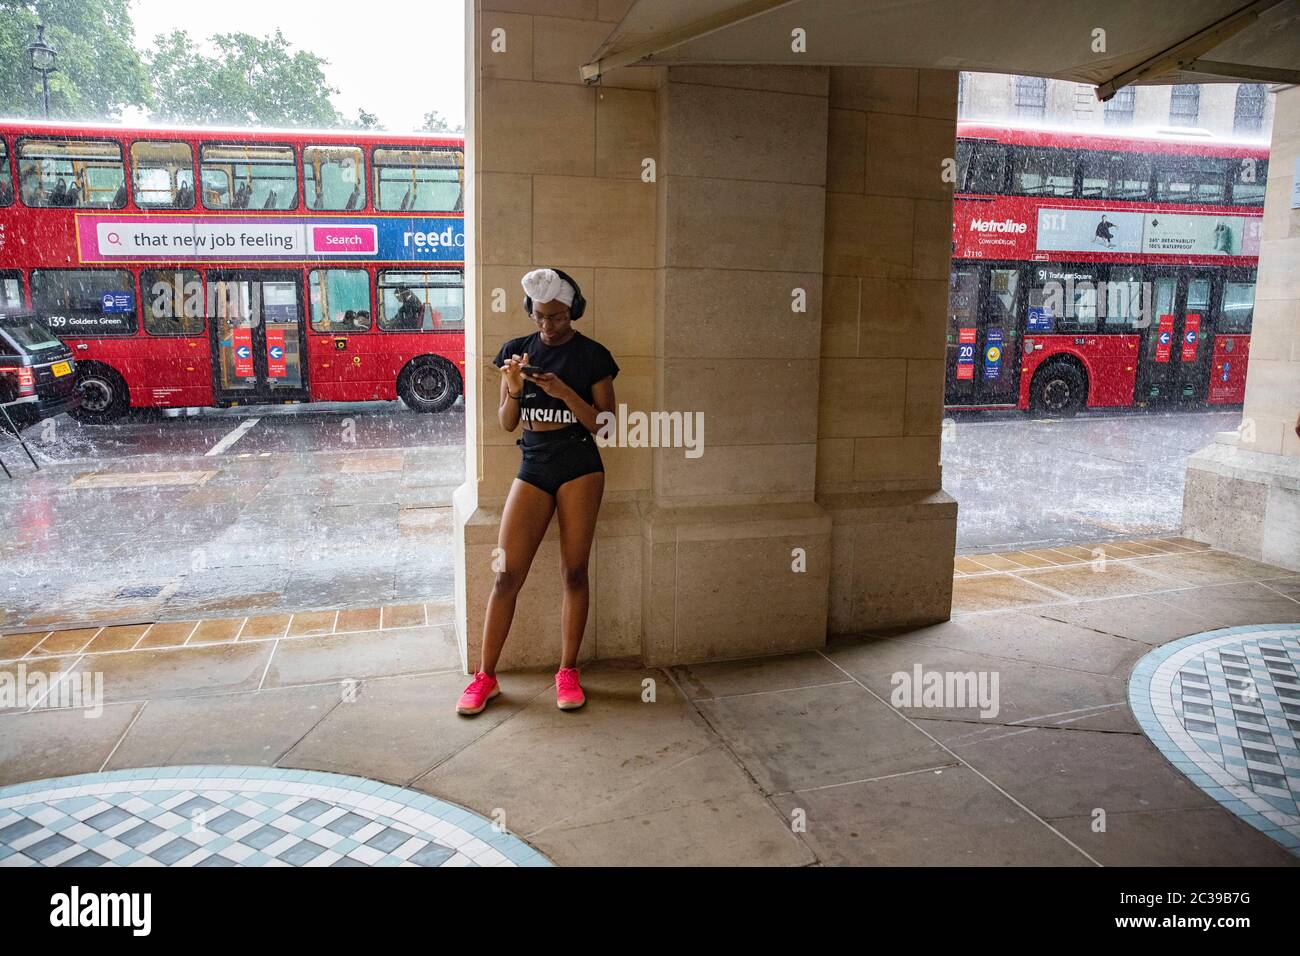 pic shows:  Flash storm in Traflagar Square led to flooding   Many caught in the rain whilst others sheltered     Picture by Gavin Rodgers/ Pixel8000 Stock Photo